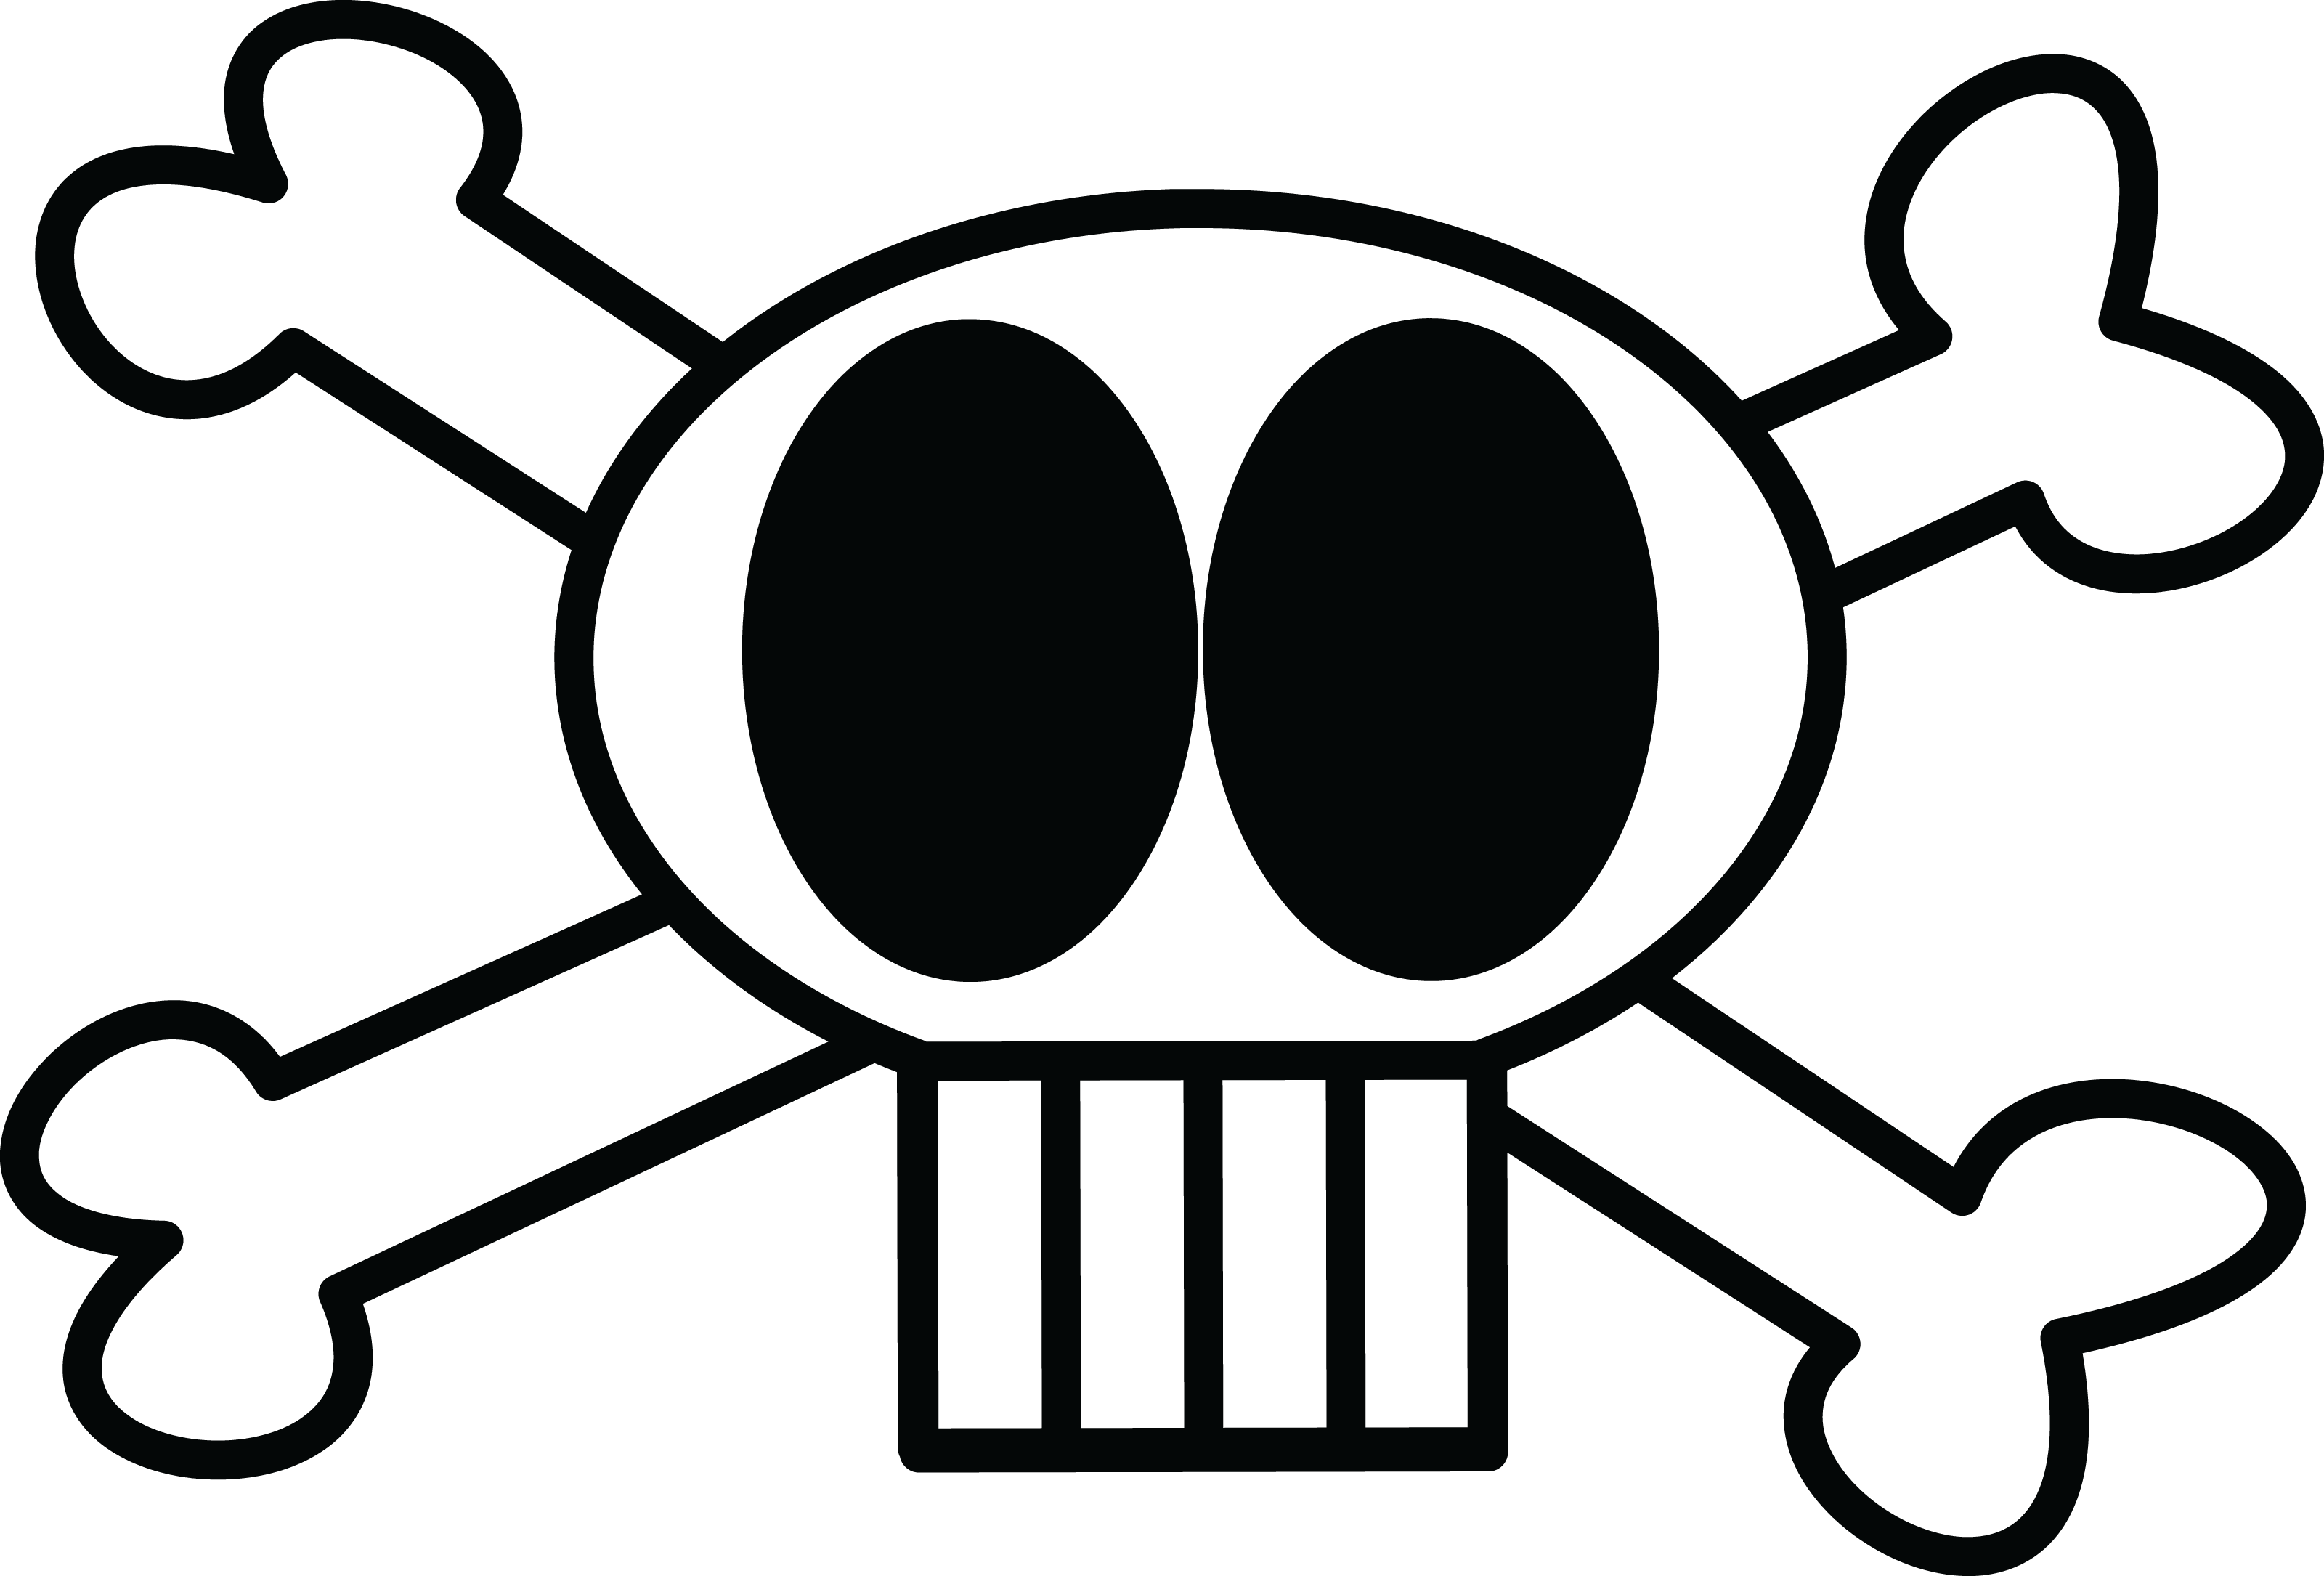 Skull and crossbones png #27238 - Free Icons and PNG Backgrounds